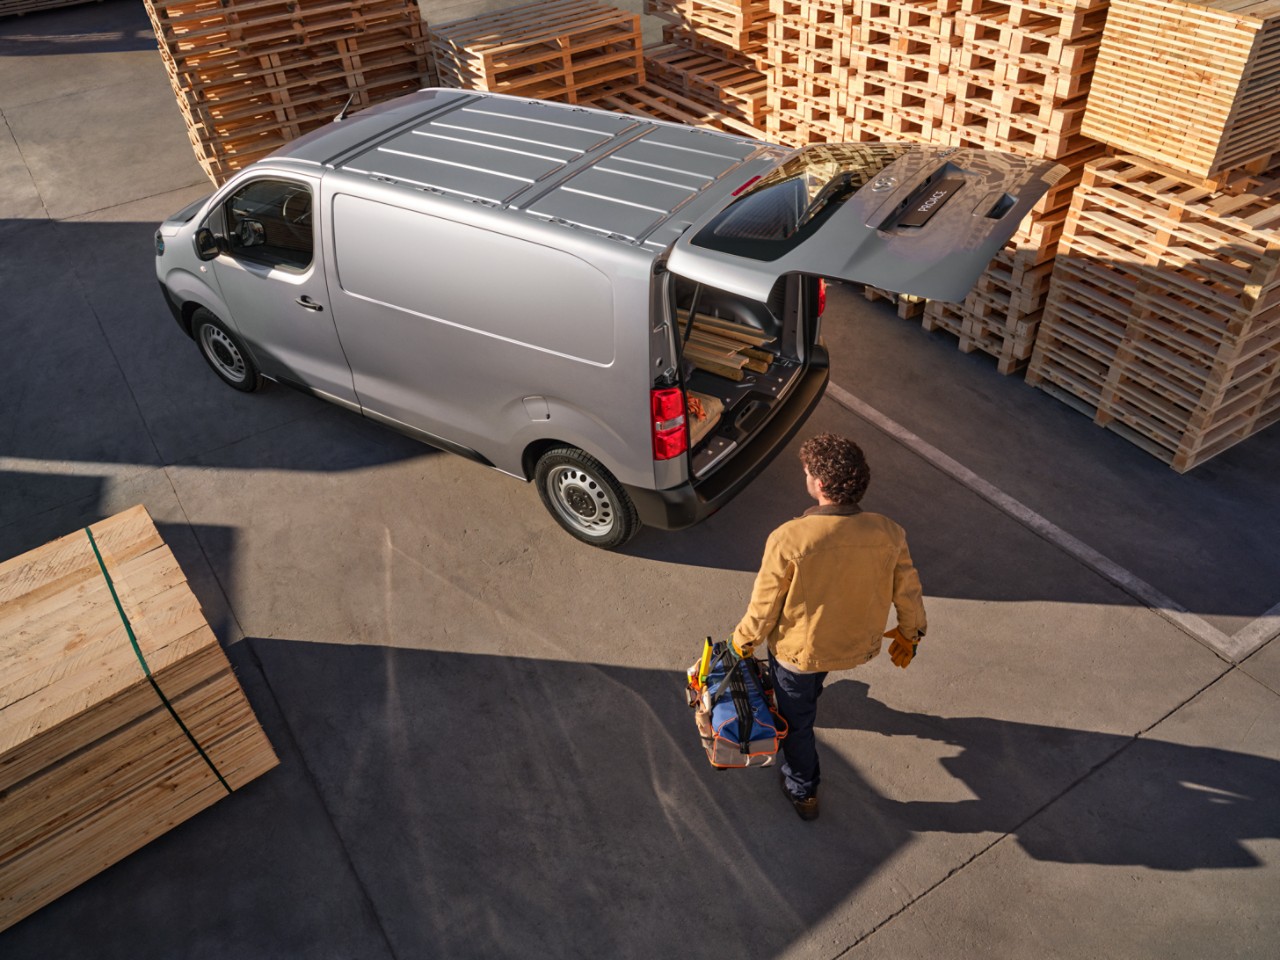 A Proace at work with its doors open